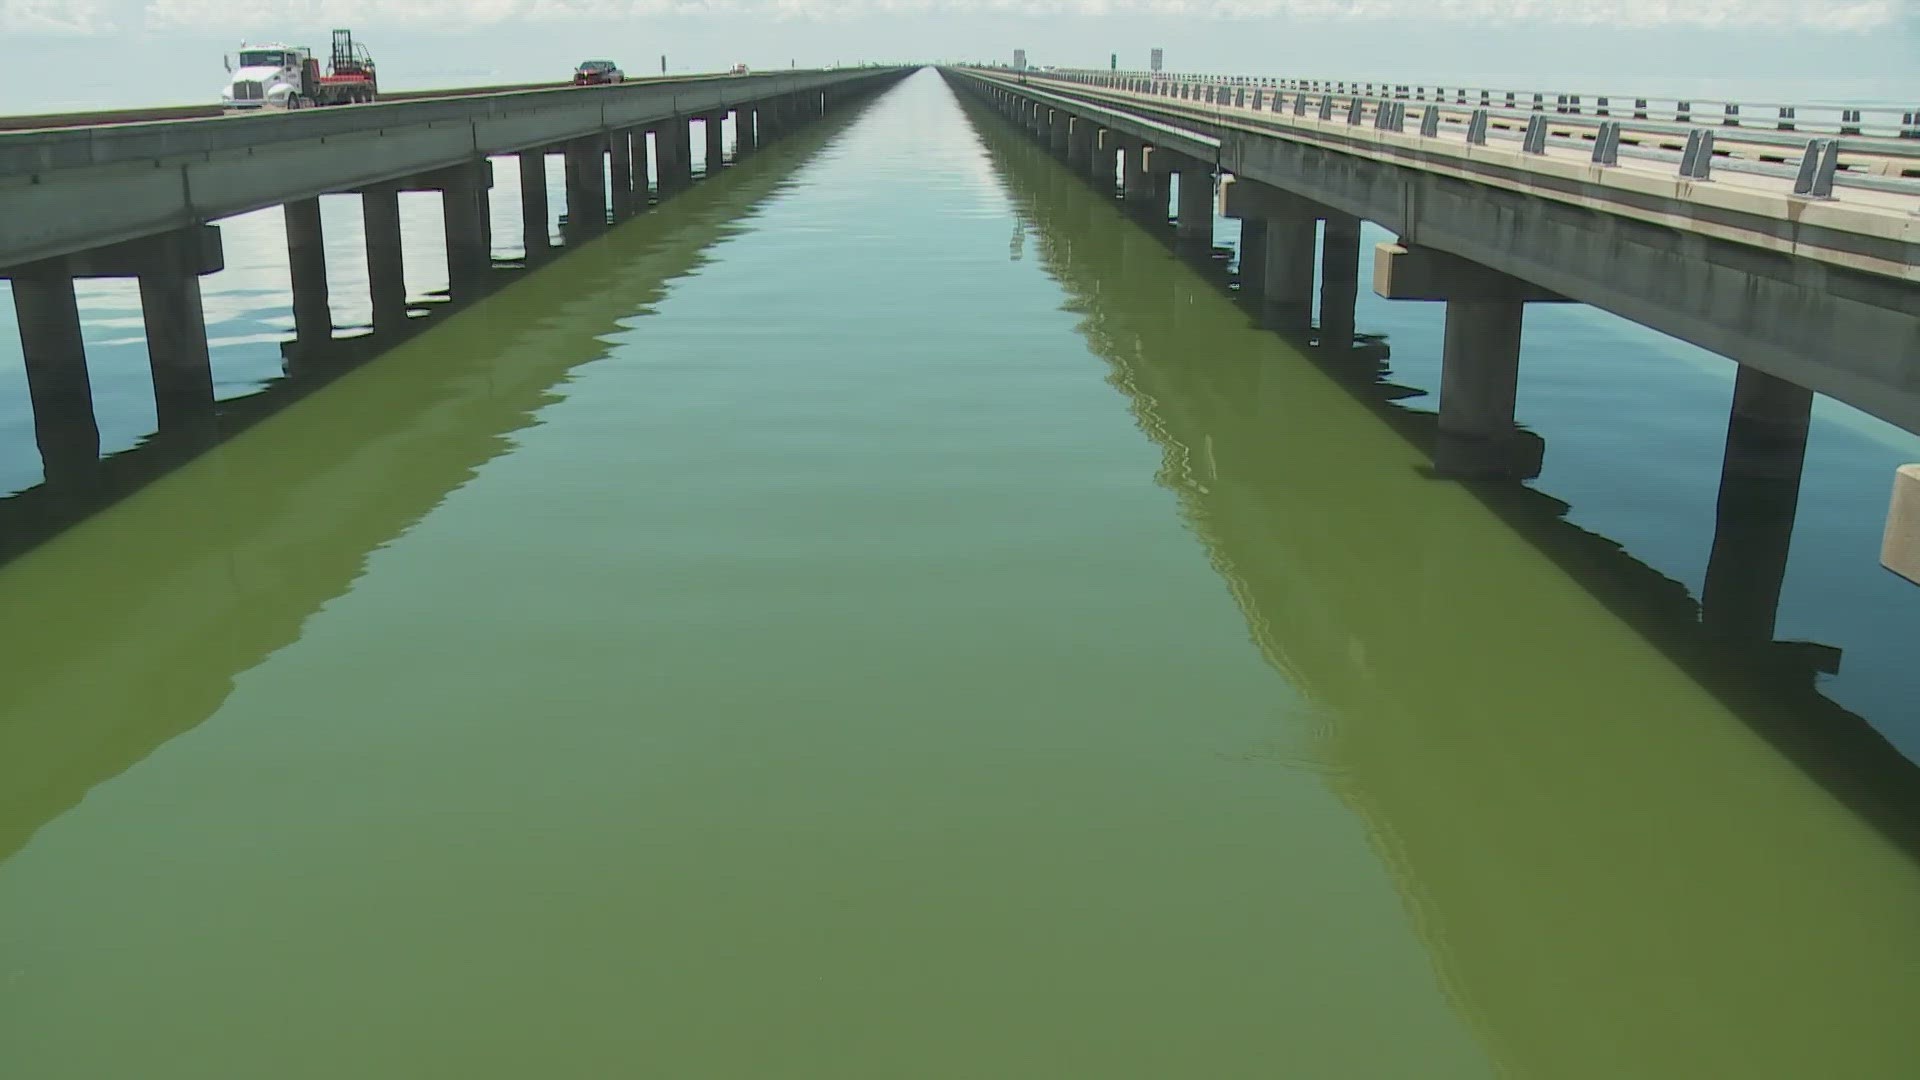 “While some algae are harmless, certain types can produce toxins that are harmful to humans, animals and the environment,” said a Health Department news release.